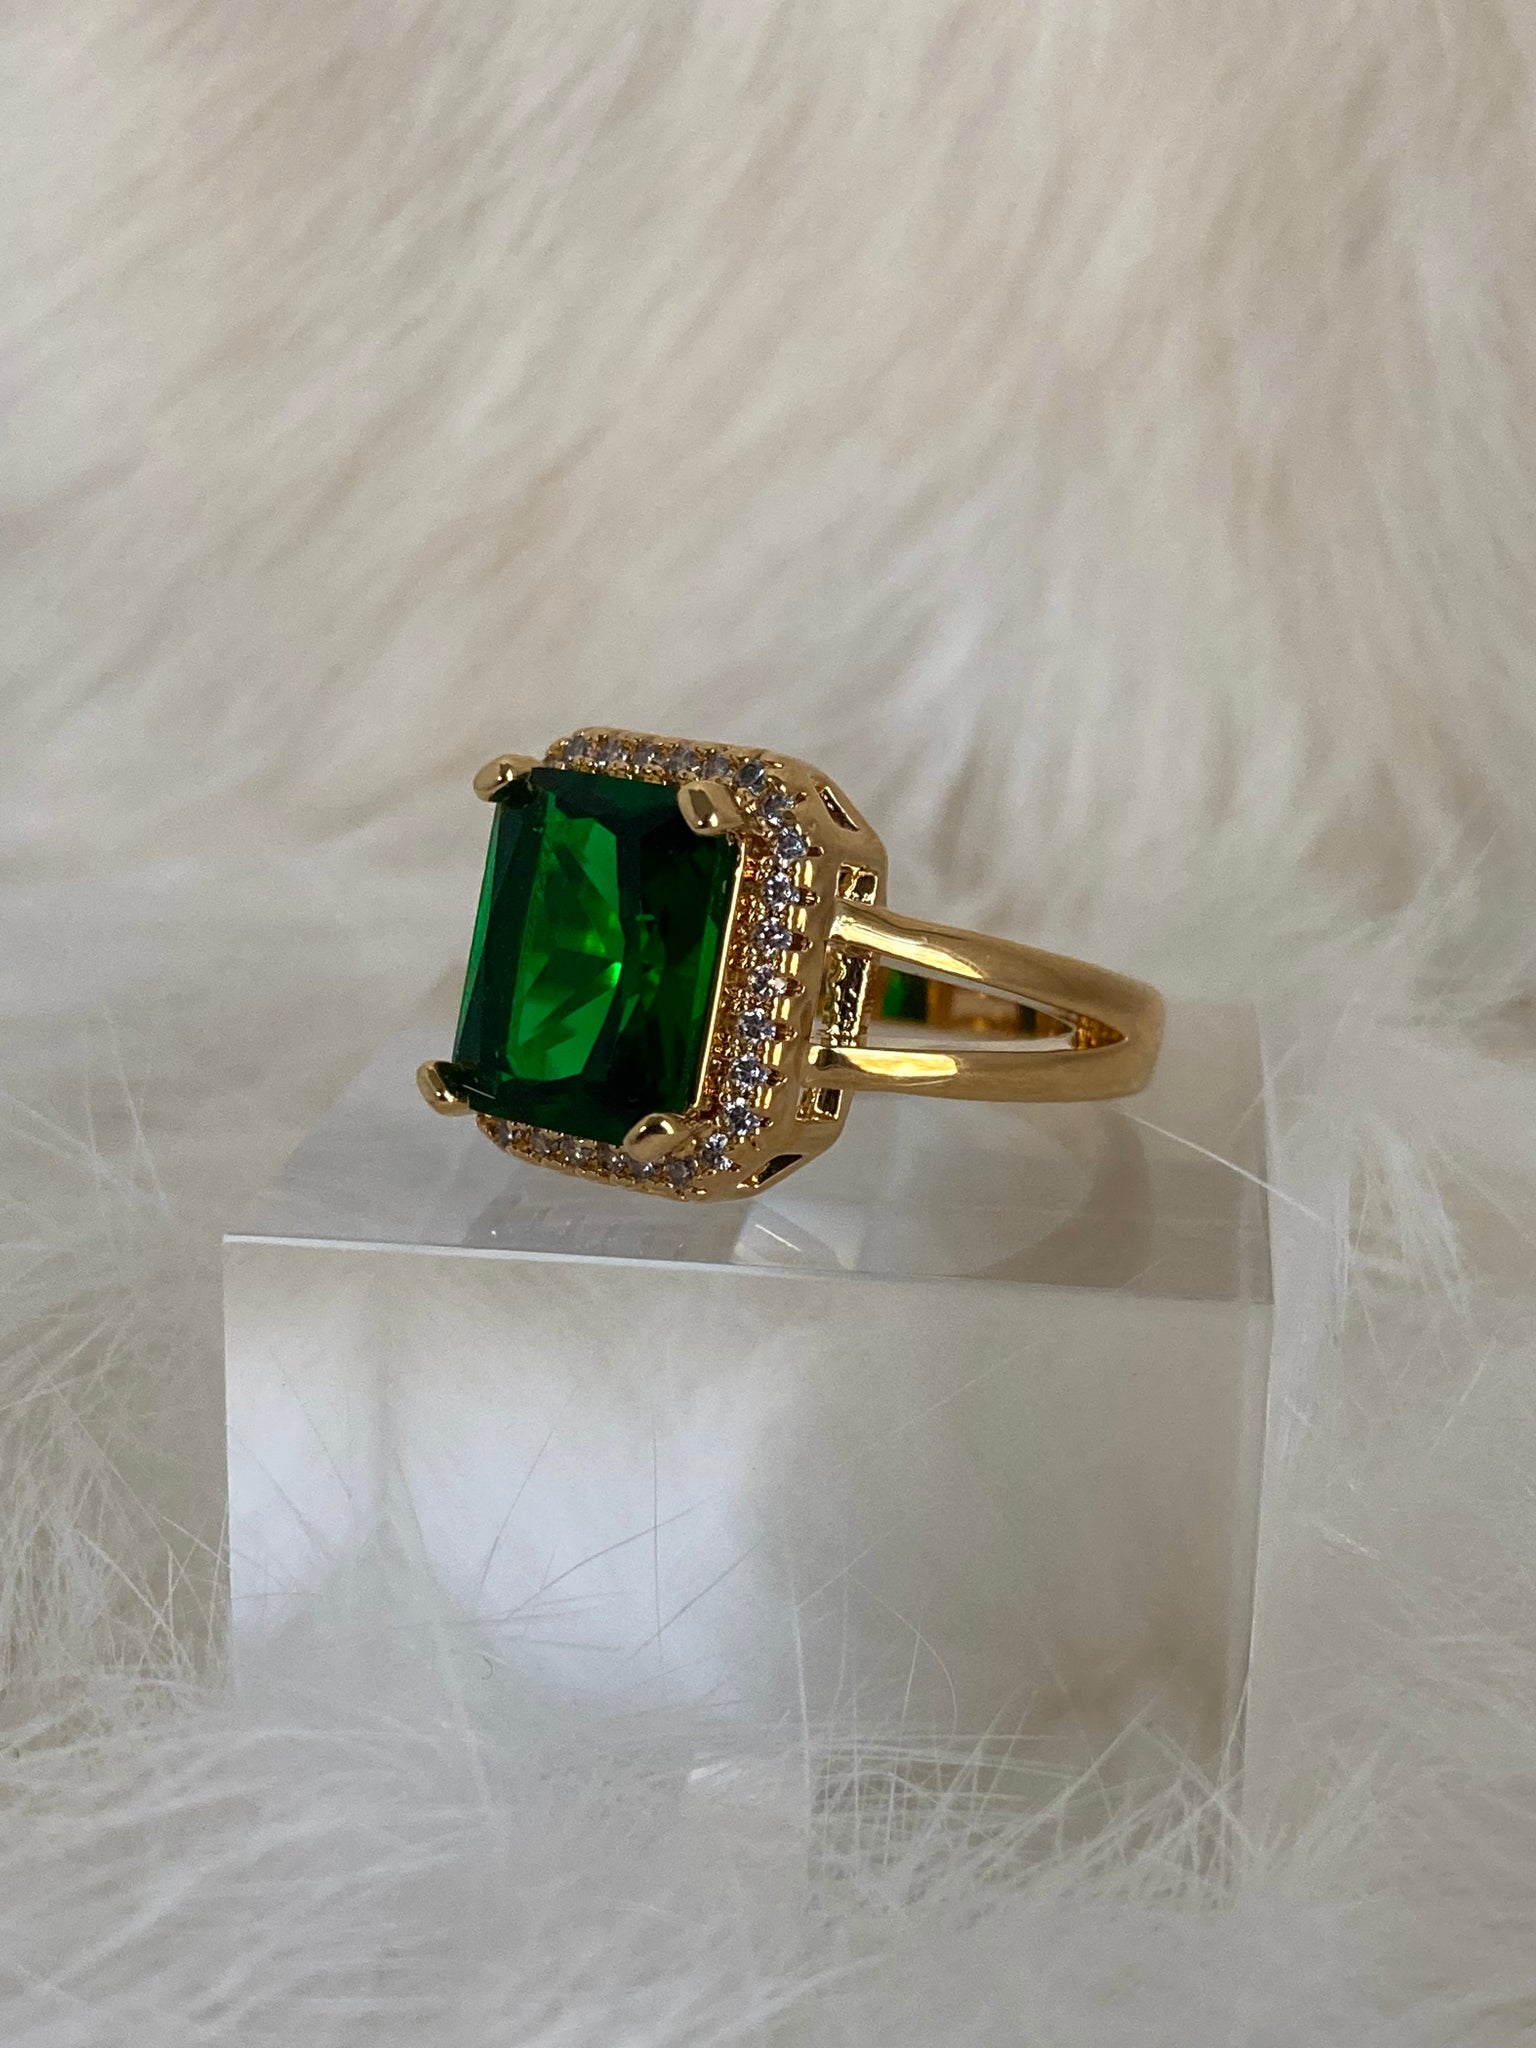 Chatham Emerald Solitaire Ring, Solitaire Ring, Emerald, Chatham Emerald -  Etsy | Emerald ring design, Stone ring design, Chatham emerald